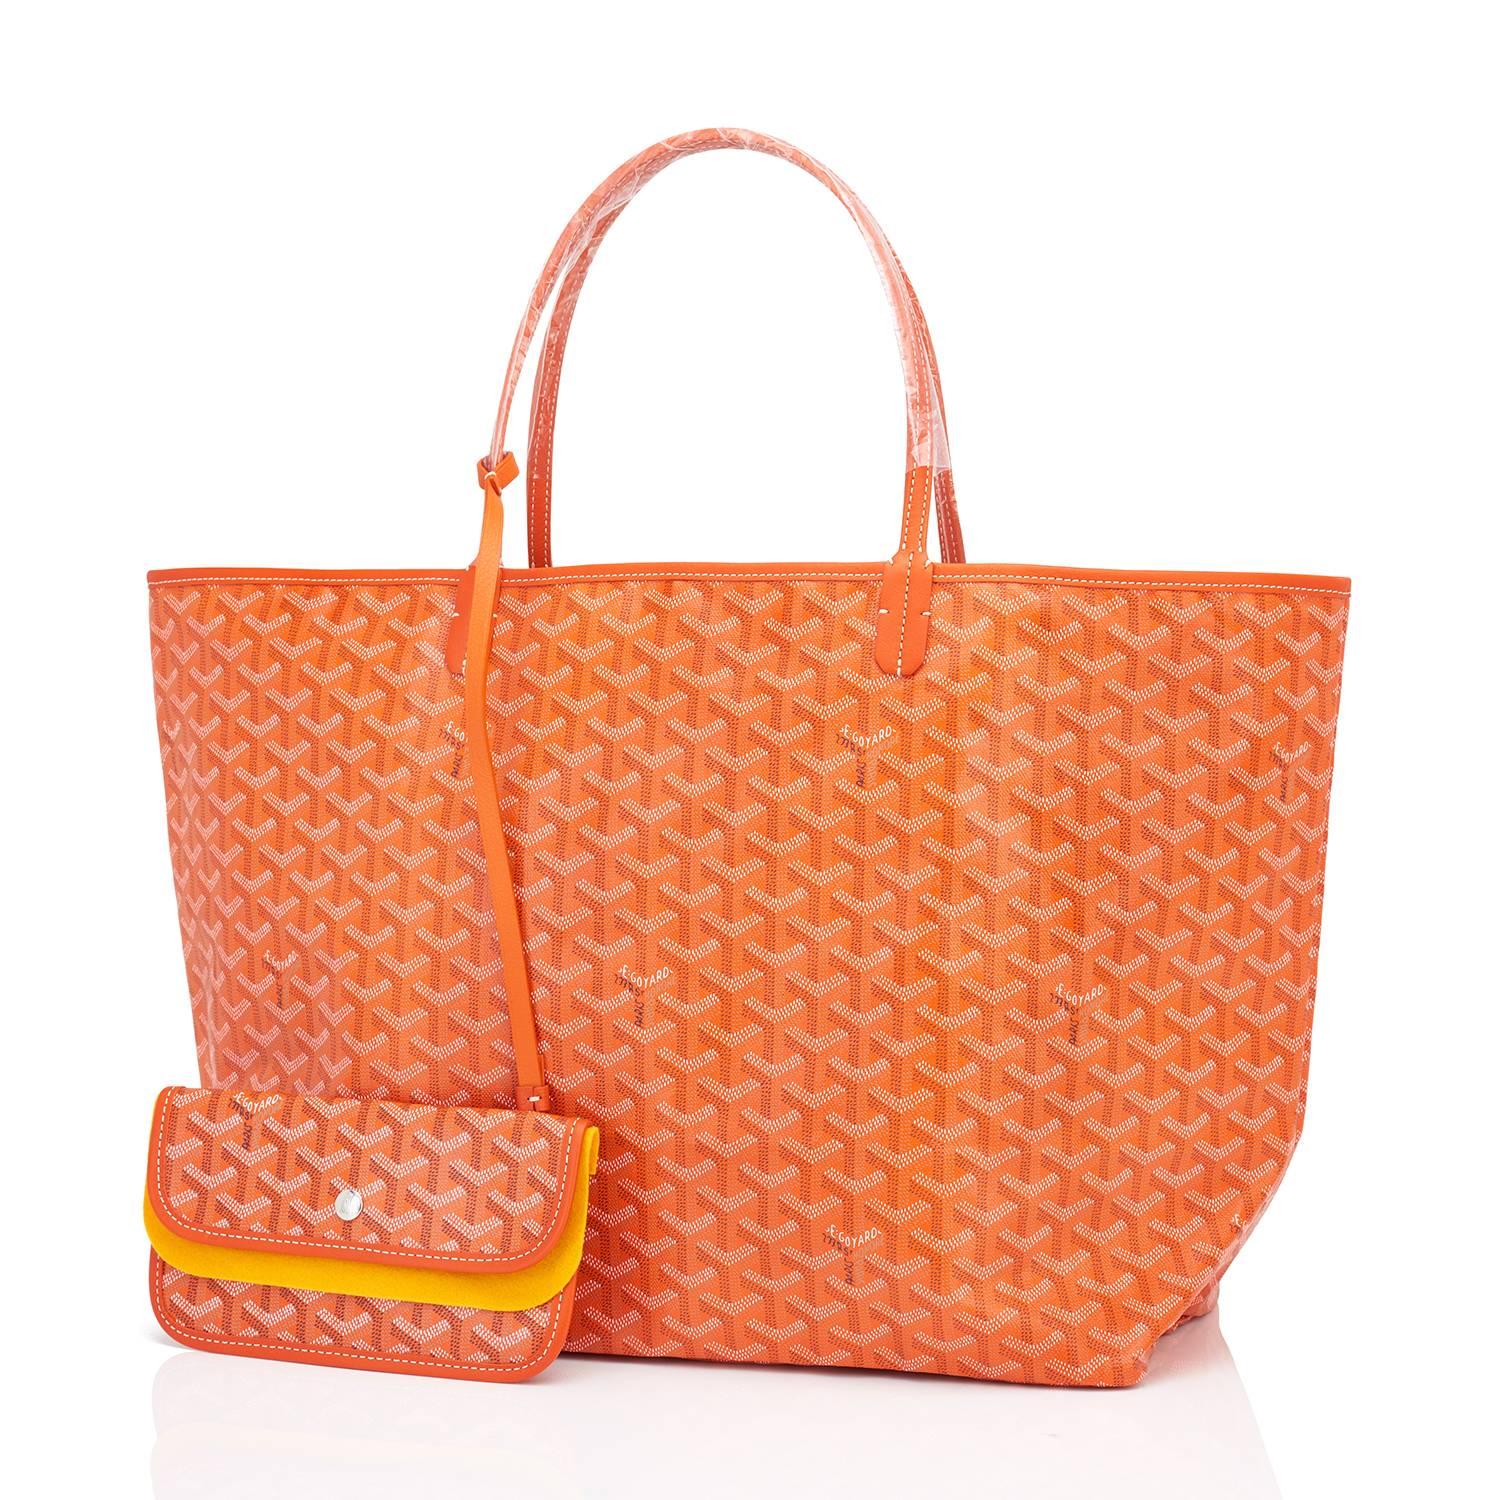 Goyard Orange St Louis GM Chevron Tote Bag 
Brand New. Store Fresh. Pristine Condition (with plastic on handles) 
Perfect gift! Comes with yellow Goyard sleeper, inner organizational pochette, and yellow protective felt.
This is the famous Goyard